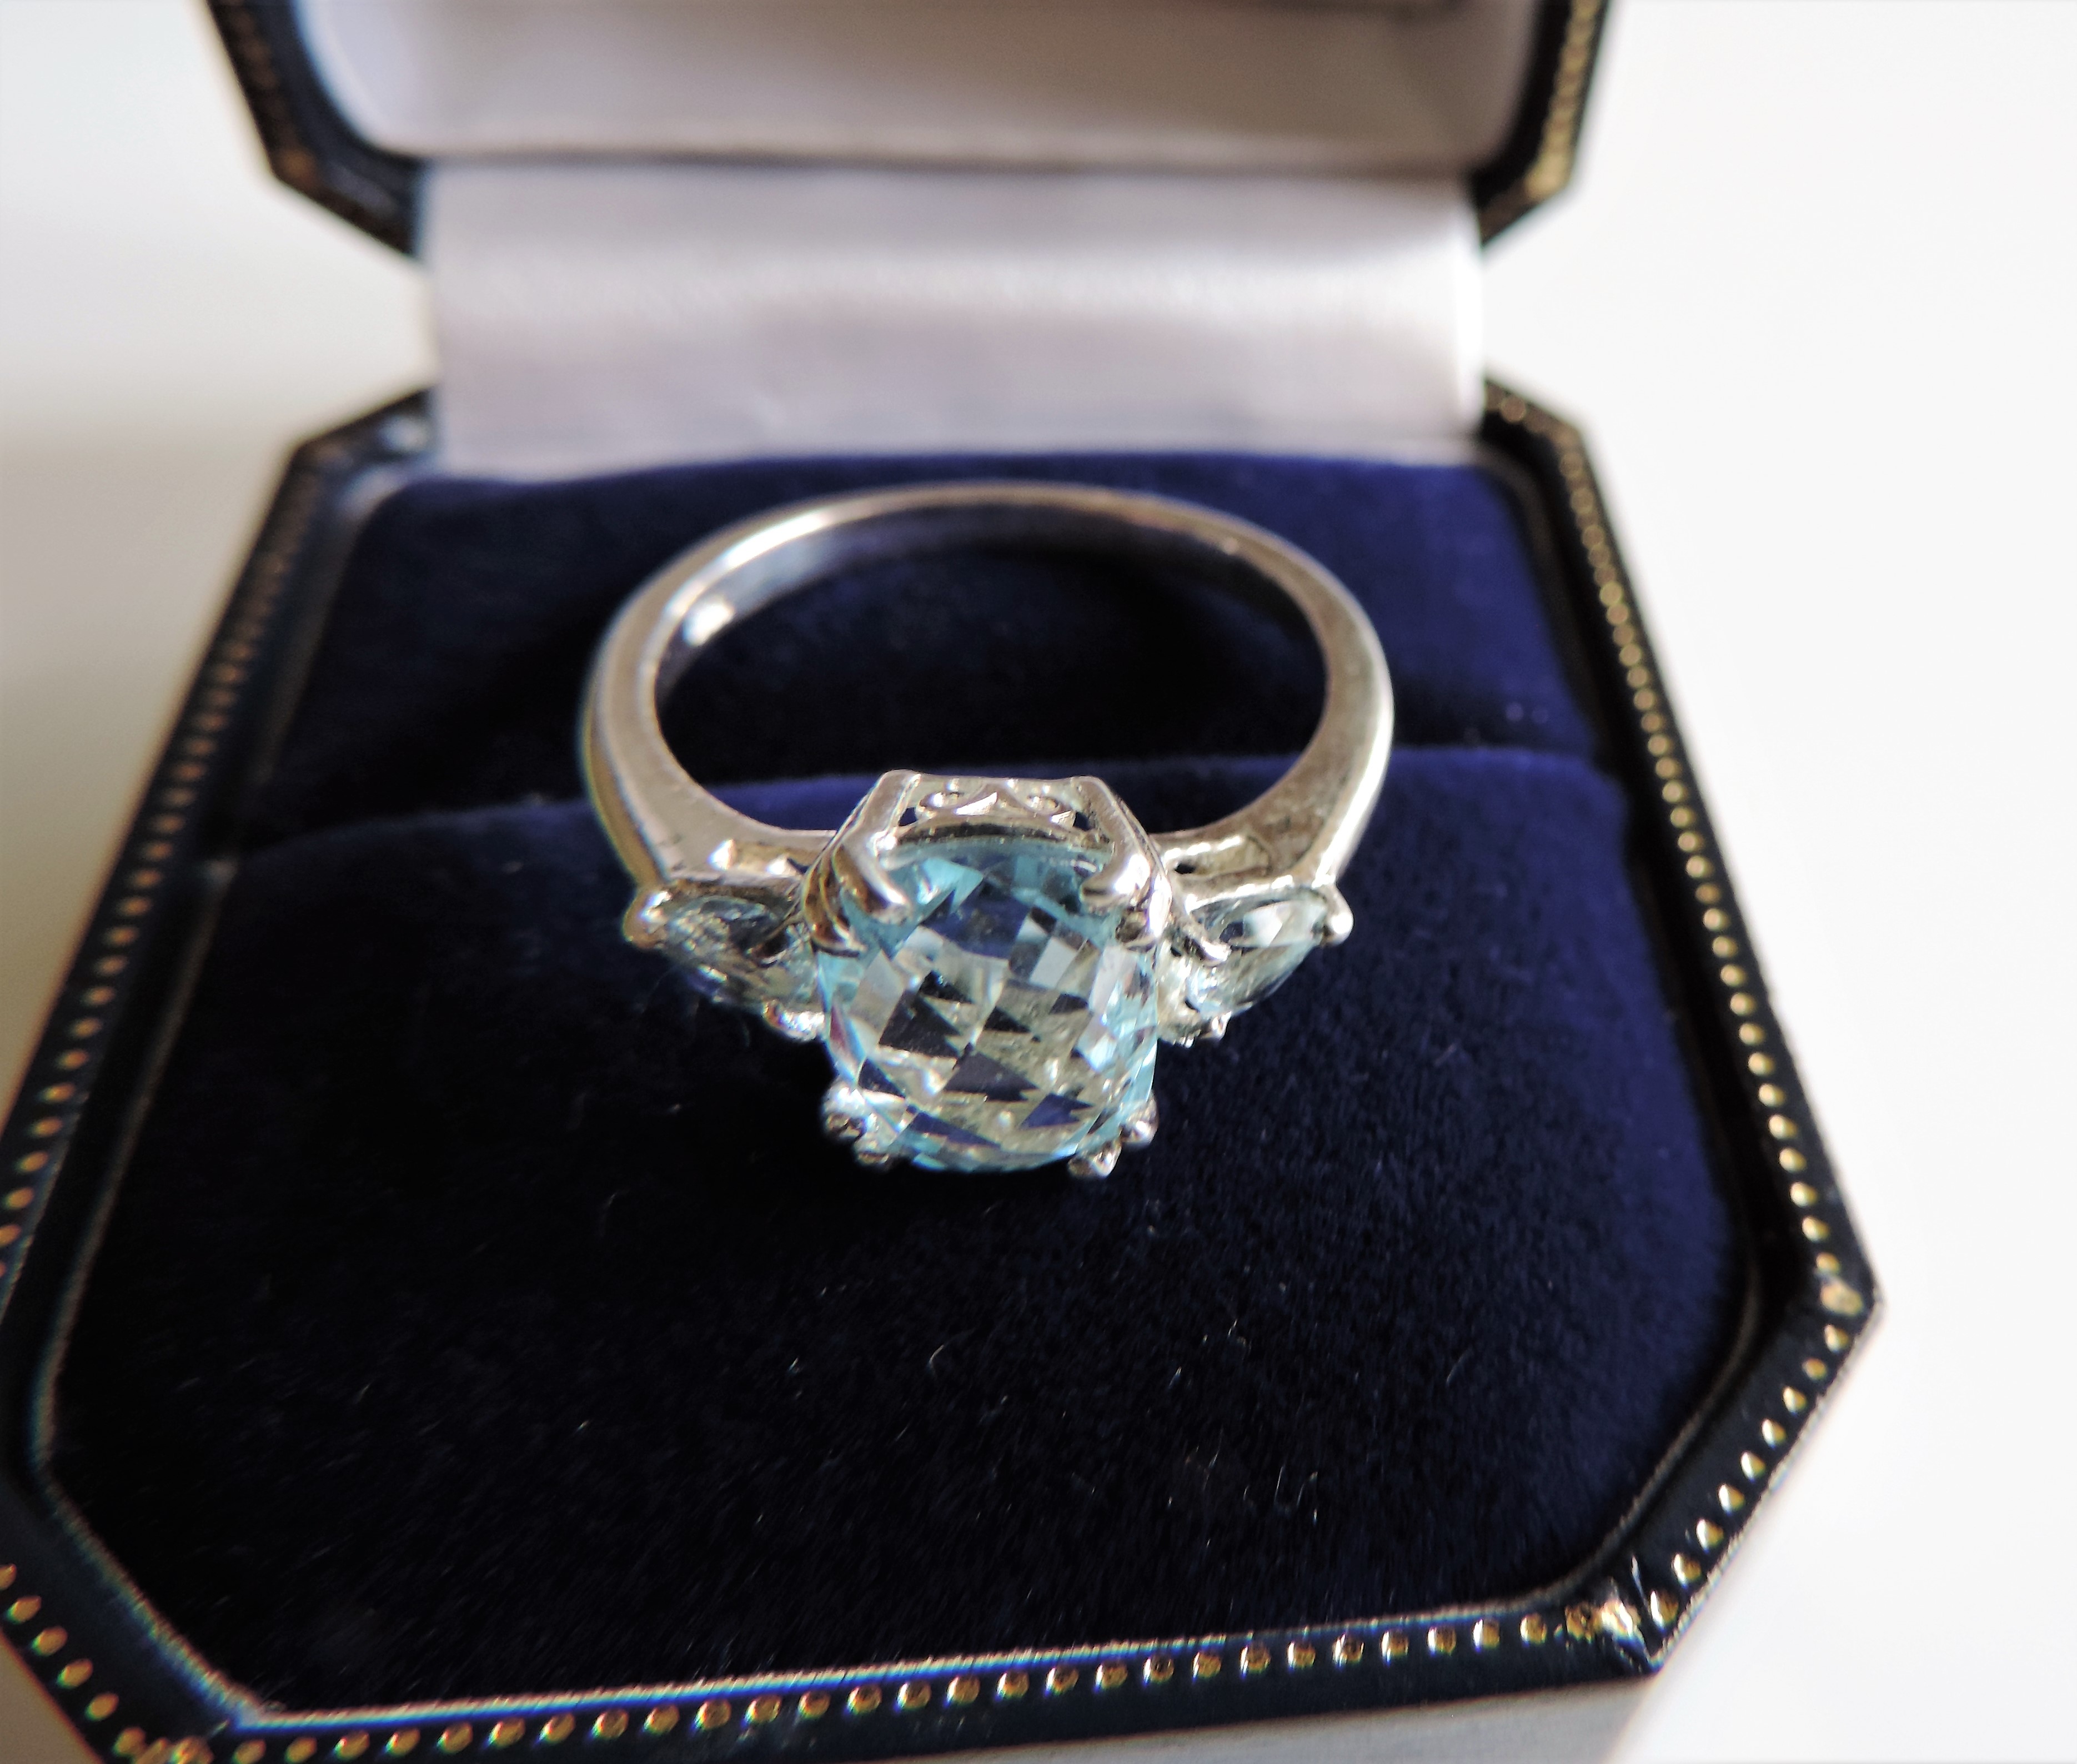 Sterling Silver 3.9ct Blue Topaz Gemstone Ring - Image 6 of 7